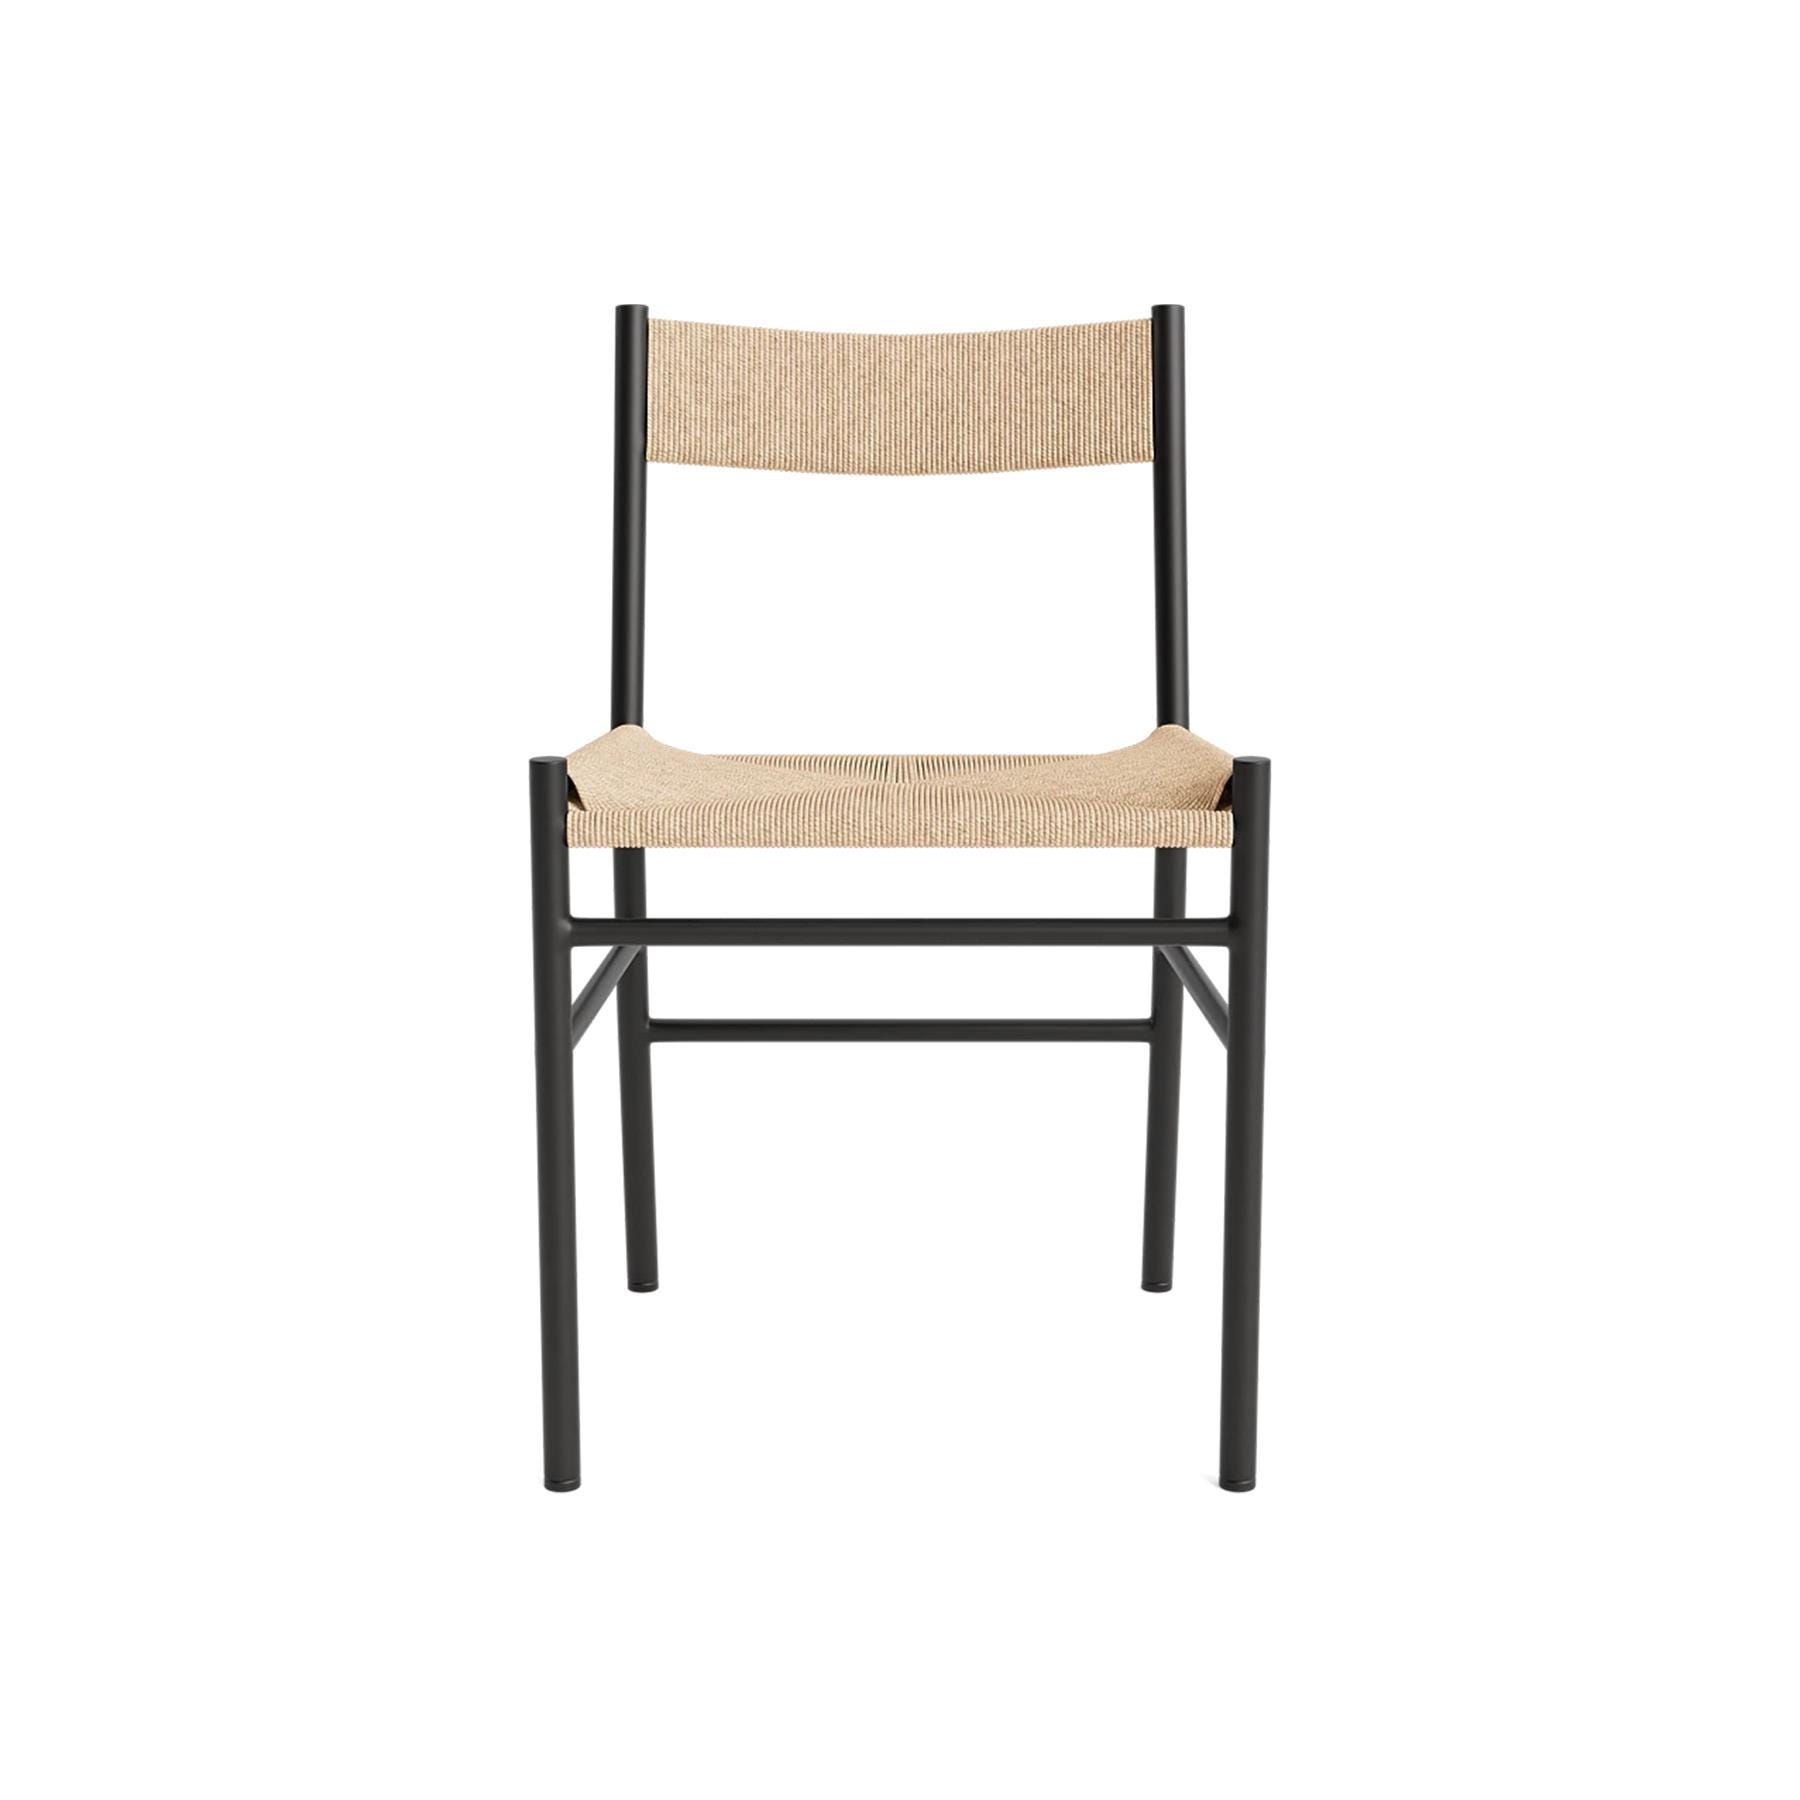 Make Nordic Cord Dining Chair Black Steel Frame Without Arm Rests Designer Furniture From Holloways Of Ludlow